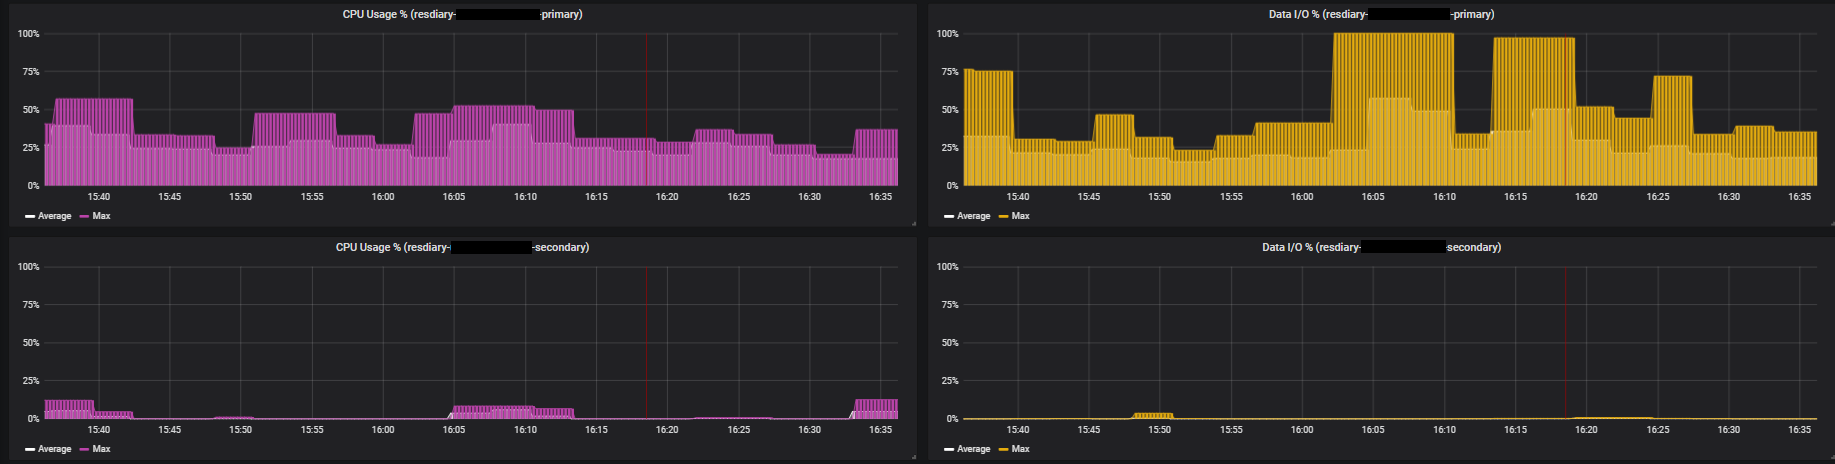 SQL Dashboard with Secondaries